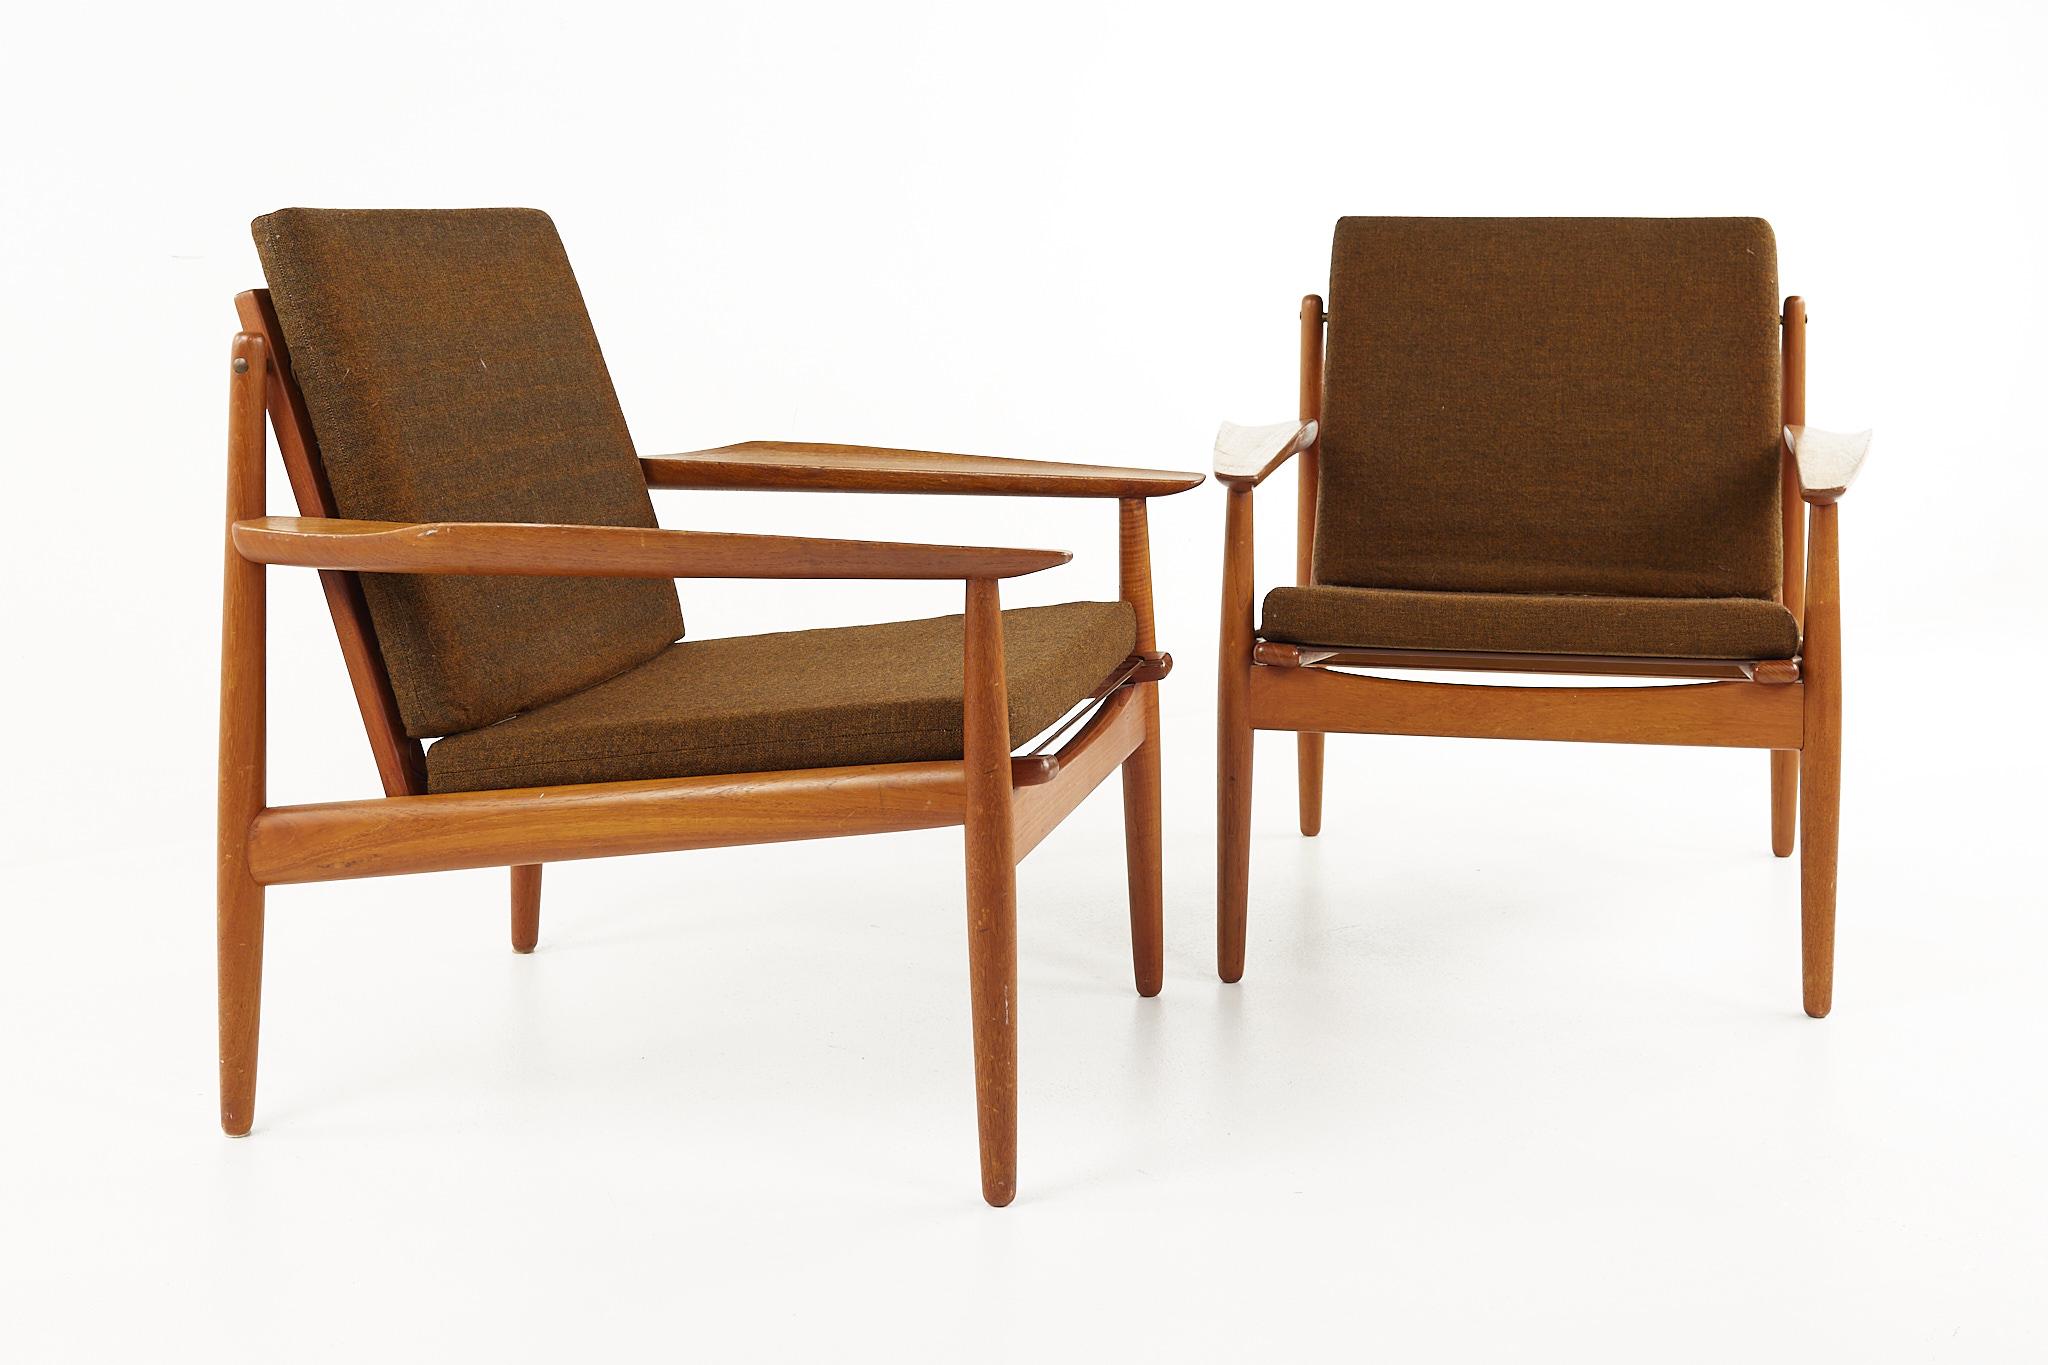 Arne Vodder Glostrup Mobelfabrik mid century danish lounge chairs - a pair

Each chair measures: 28.75 wide x 29 deep x 31 high, with a seat height of 16 inches and arm height/chair clearance of 21 inches

All pieces of furniture can be had in